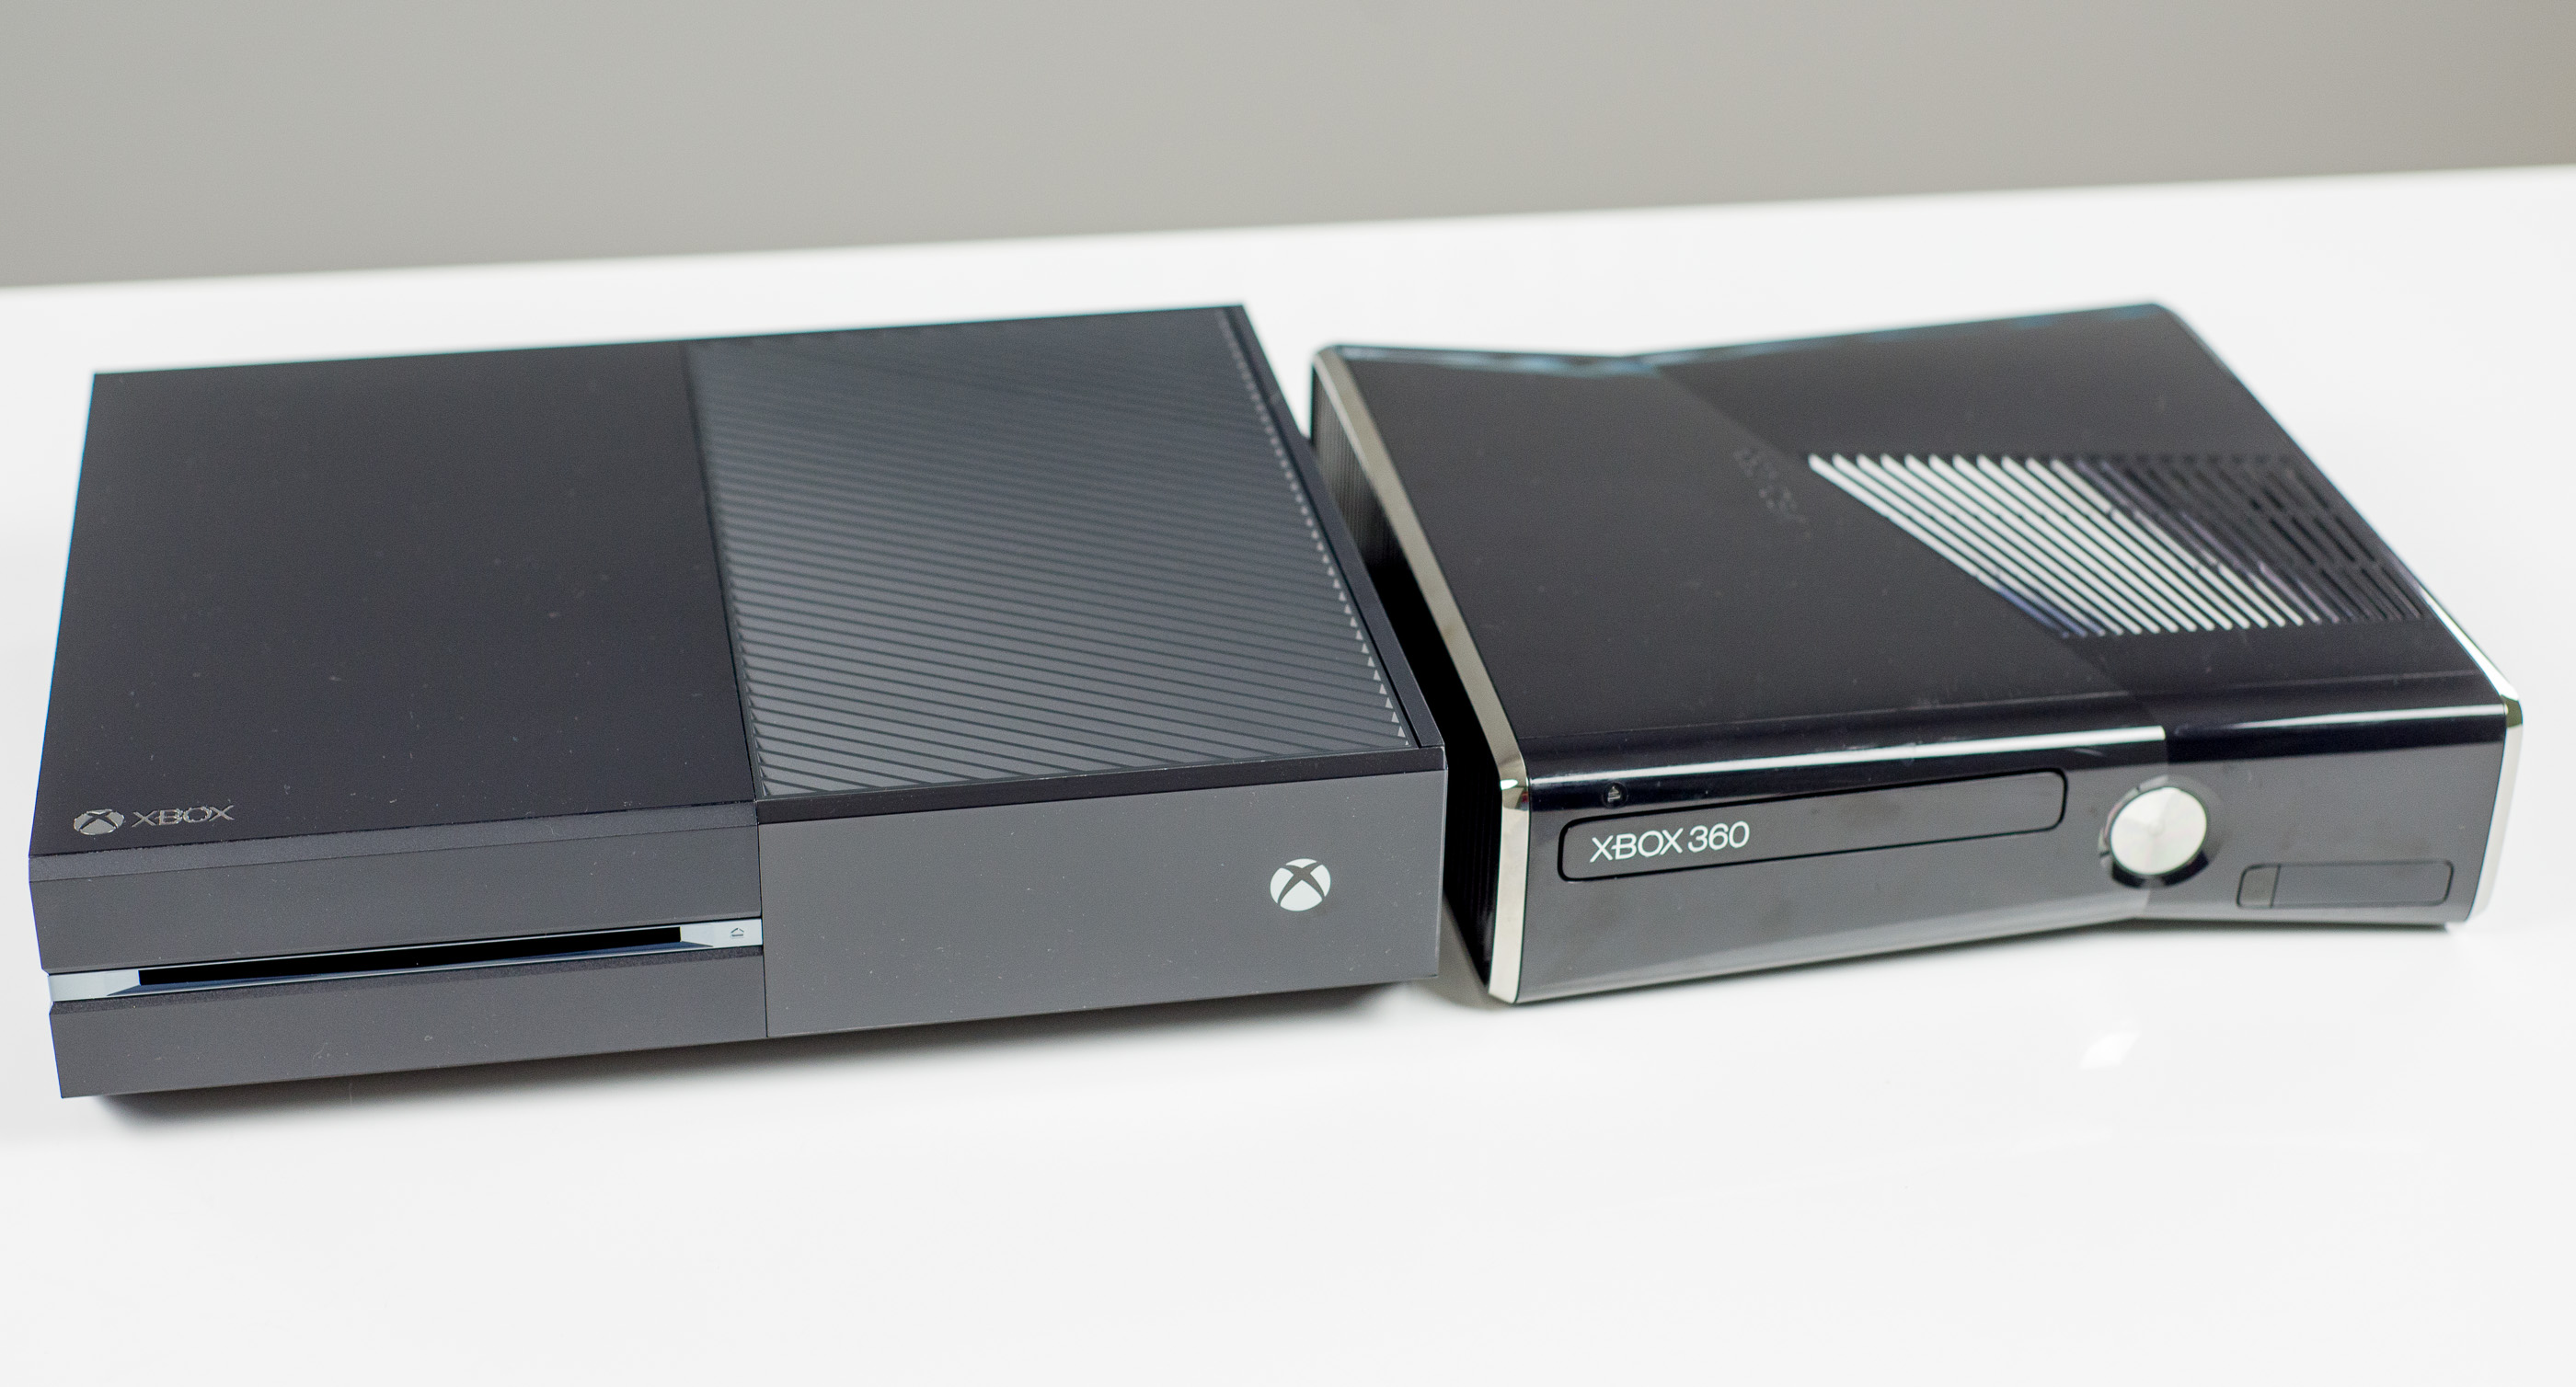 industry Want Treaty The Xbox One - Mini Review & Comparison to Xbox 360/PS4